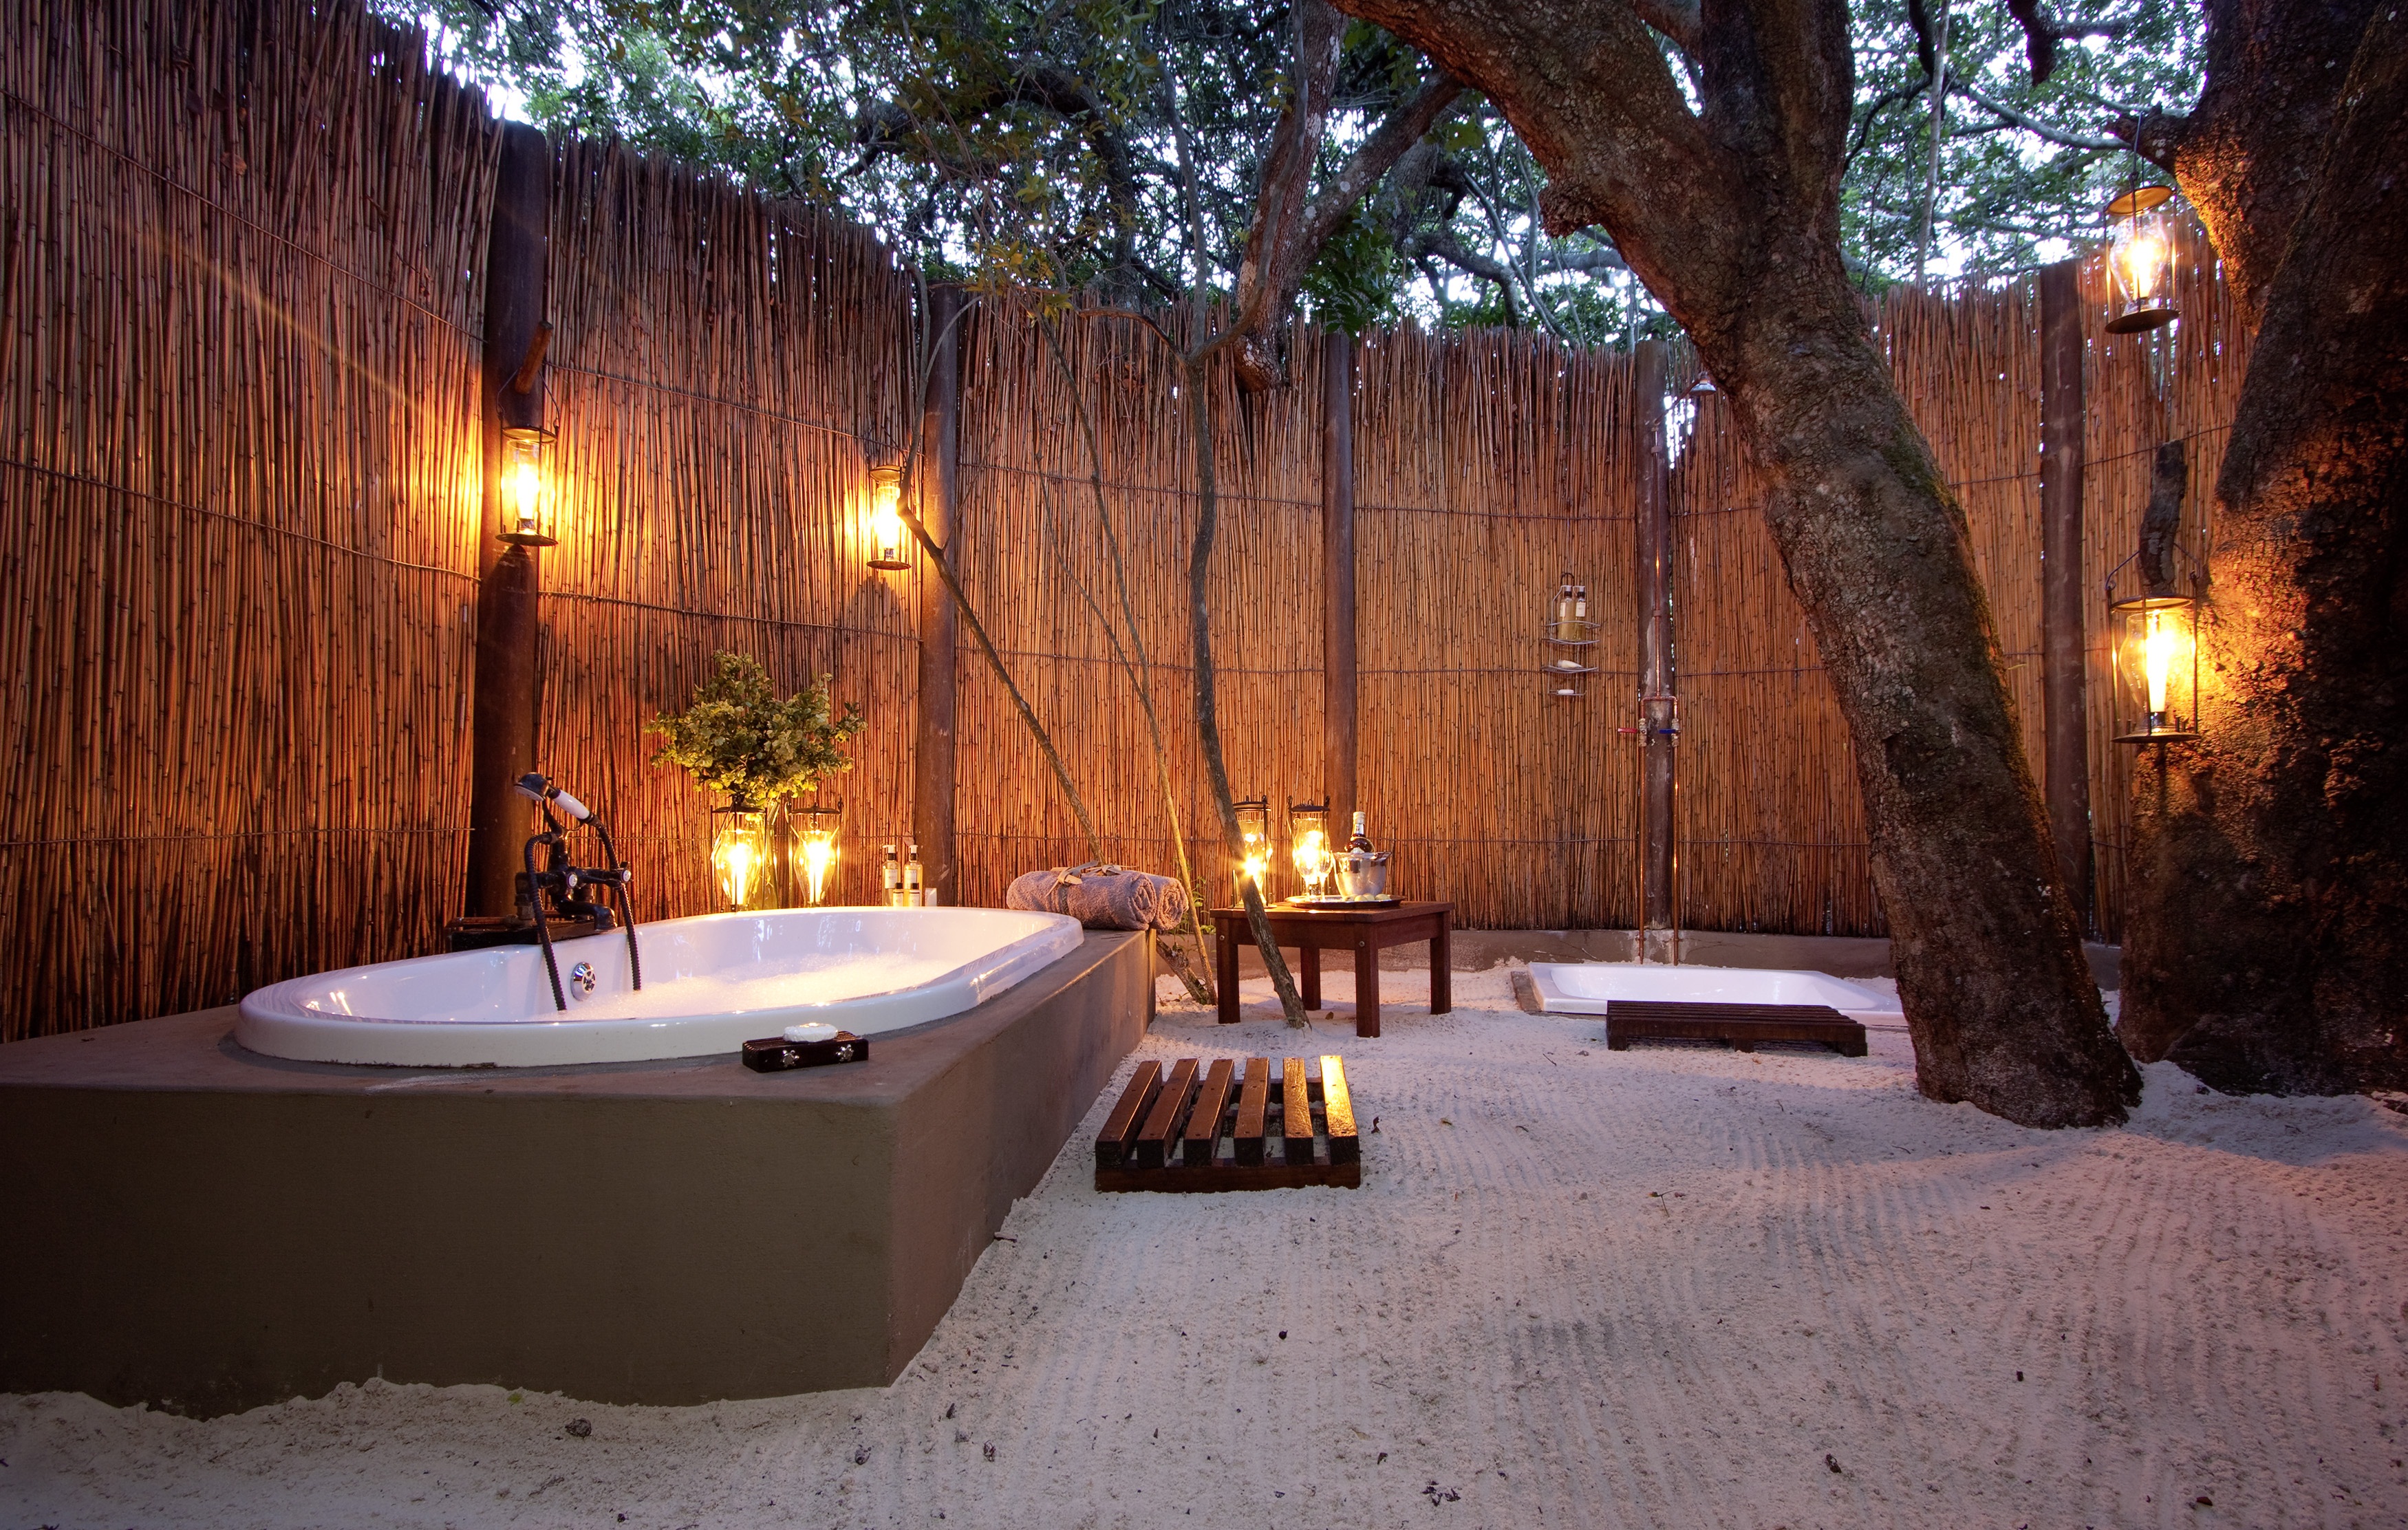 Bathing under open African skies, by candlelight, is one for the Bucket List